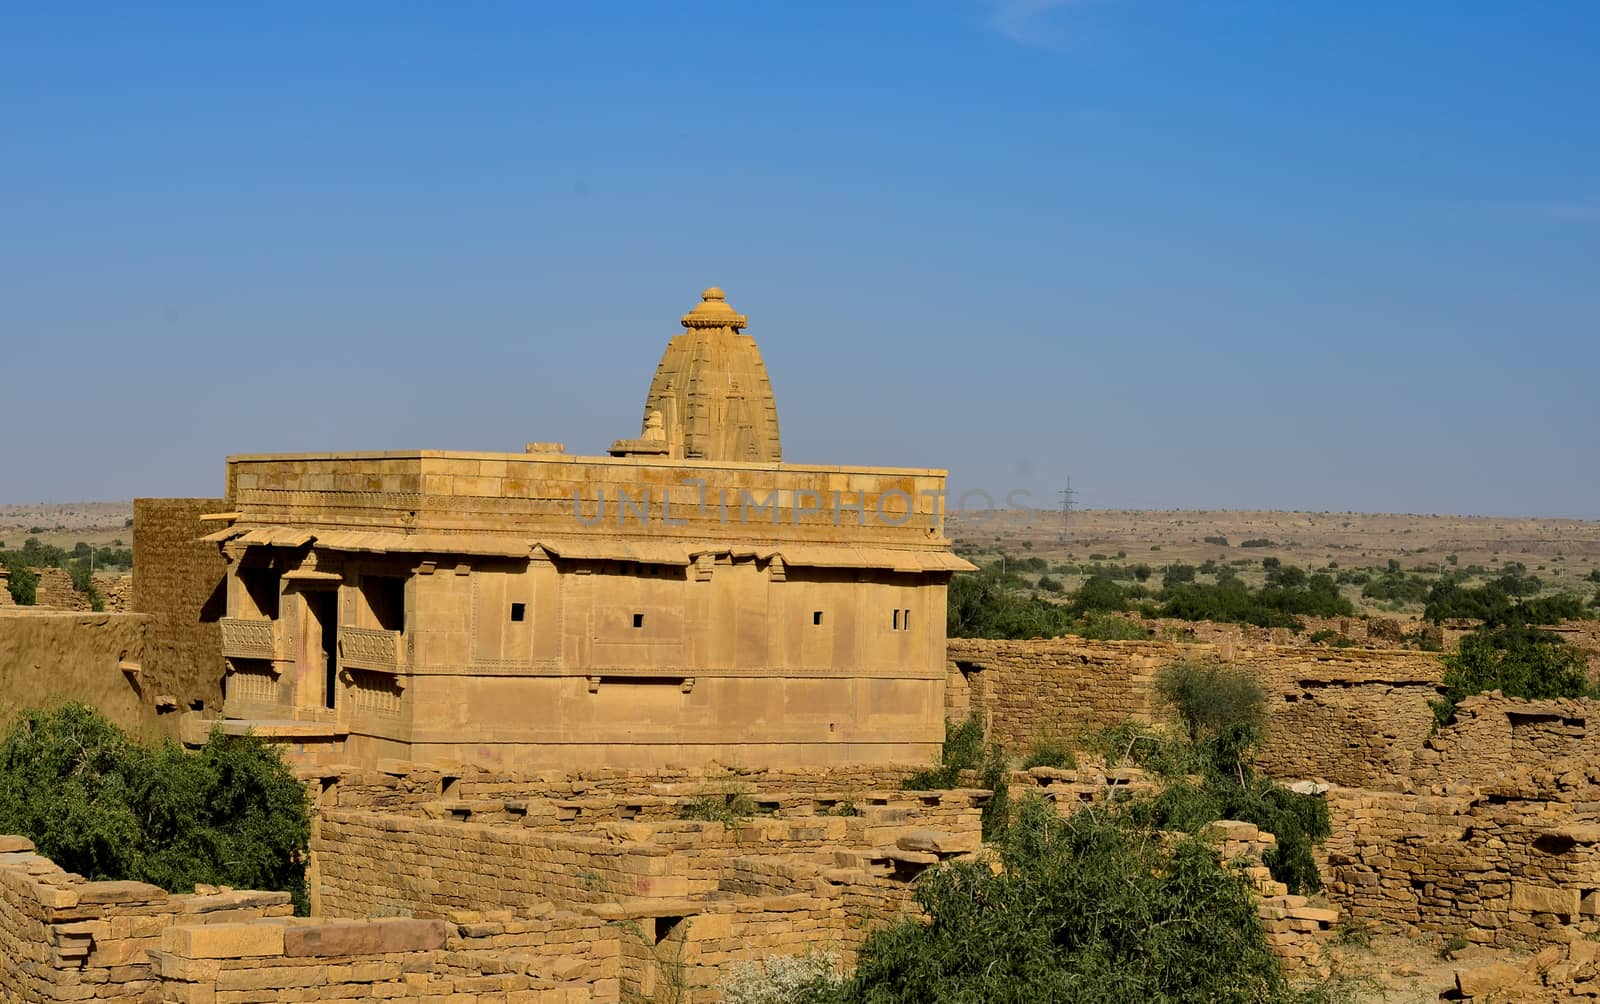 Temple in an abandoned town of Kuldhara near Jaisalmer on the way to Sam Sand Dunes, Rajasthan, India. Established around 13th century, it was once a prosperous village inhabited by Paliwal Brahmins